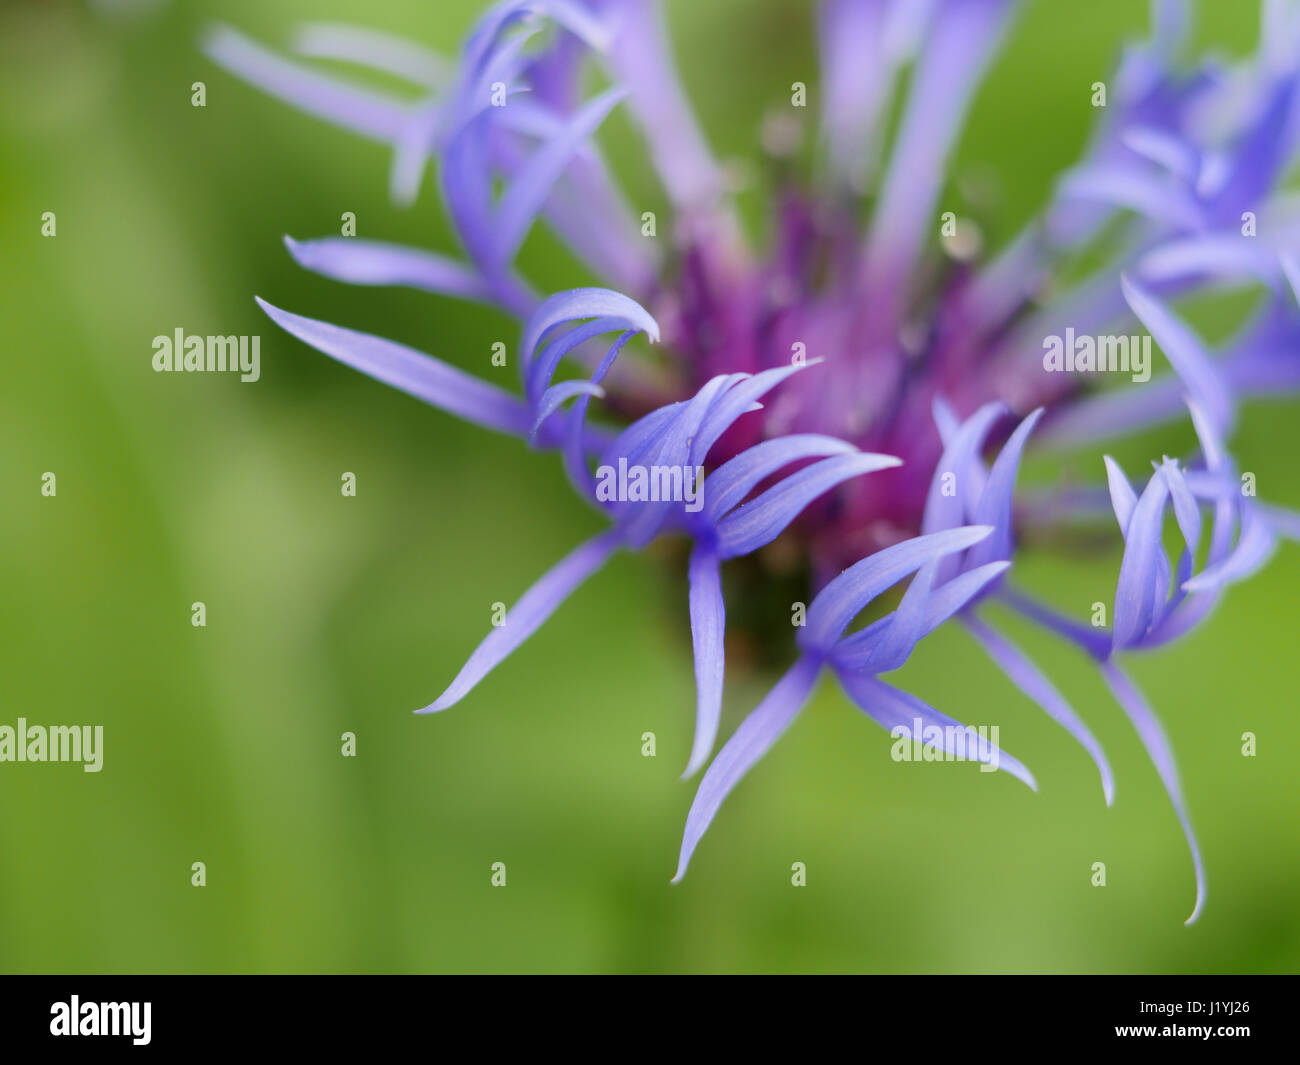 Close-up of a corn flower petals opening Stock Photo